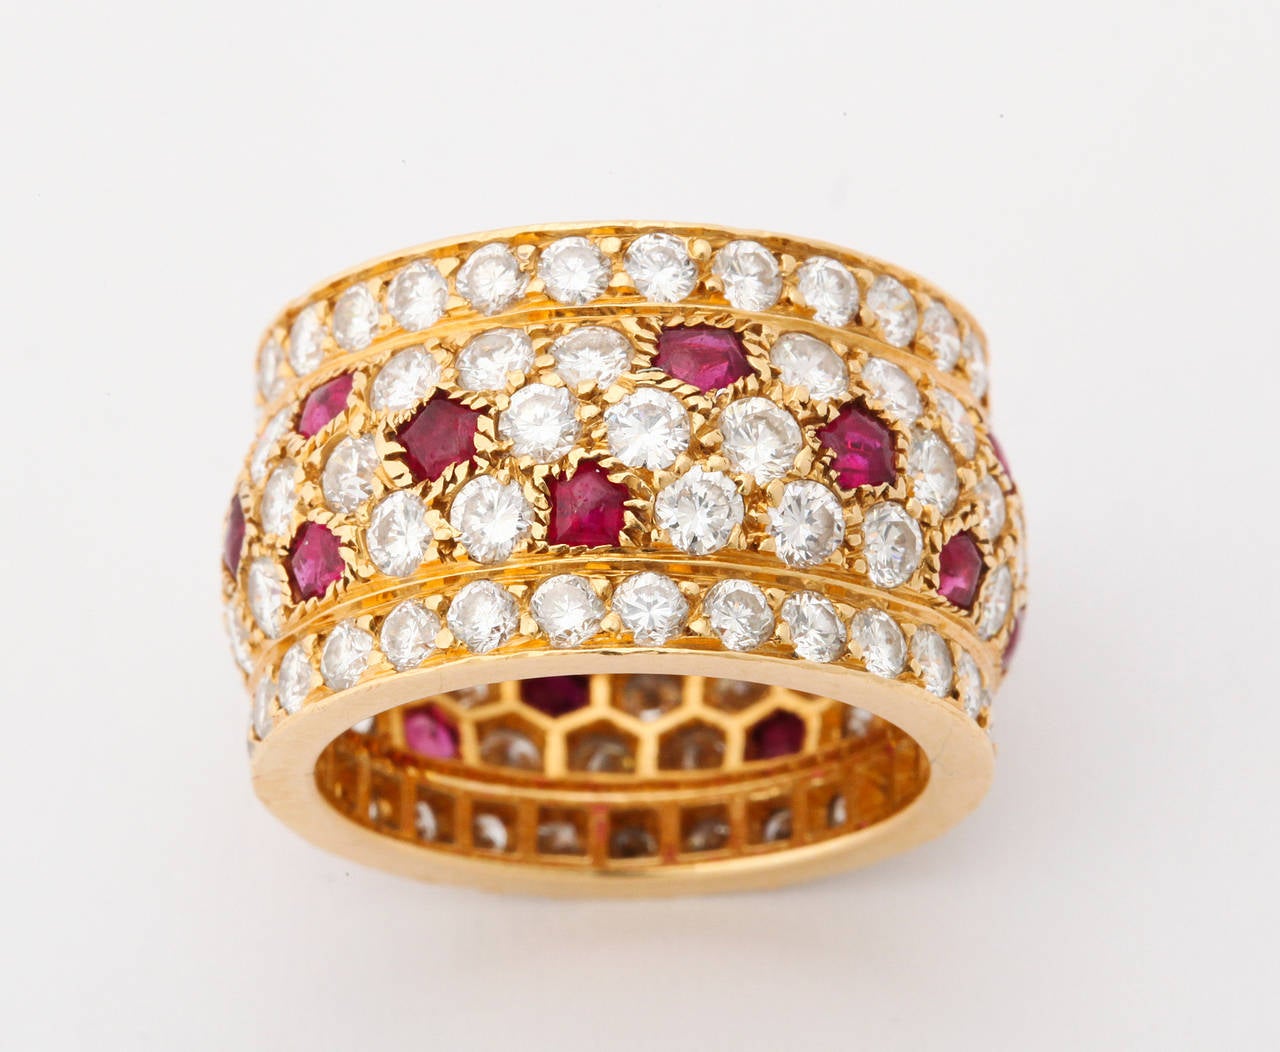 18kt yellow gold, ruby and diamond (app. 6cts) ring from the iconic Panthère collection.  A perfect size 6, and a comfortable 1/2 inch in width, this ring is meant to be worn and enjoyed.  Fully signed, numbered and hallmarked.  Made in France.